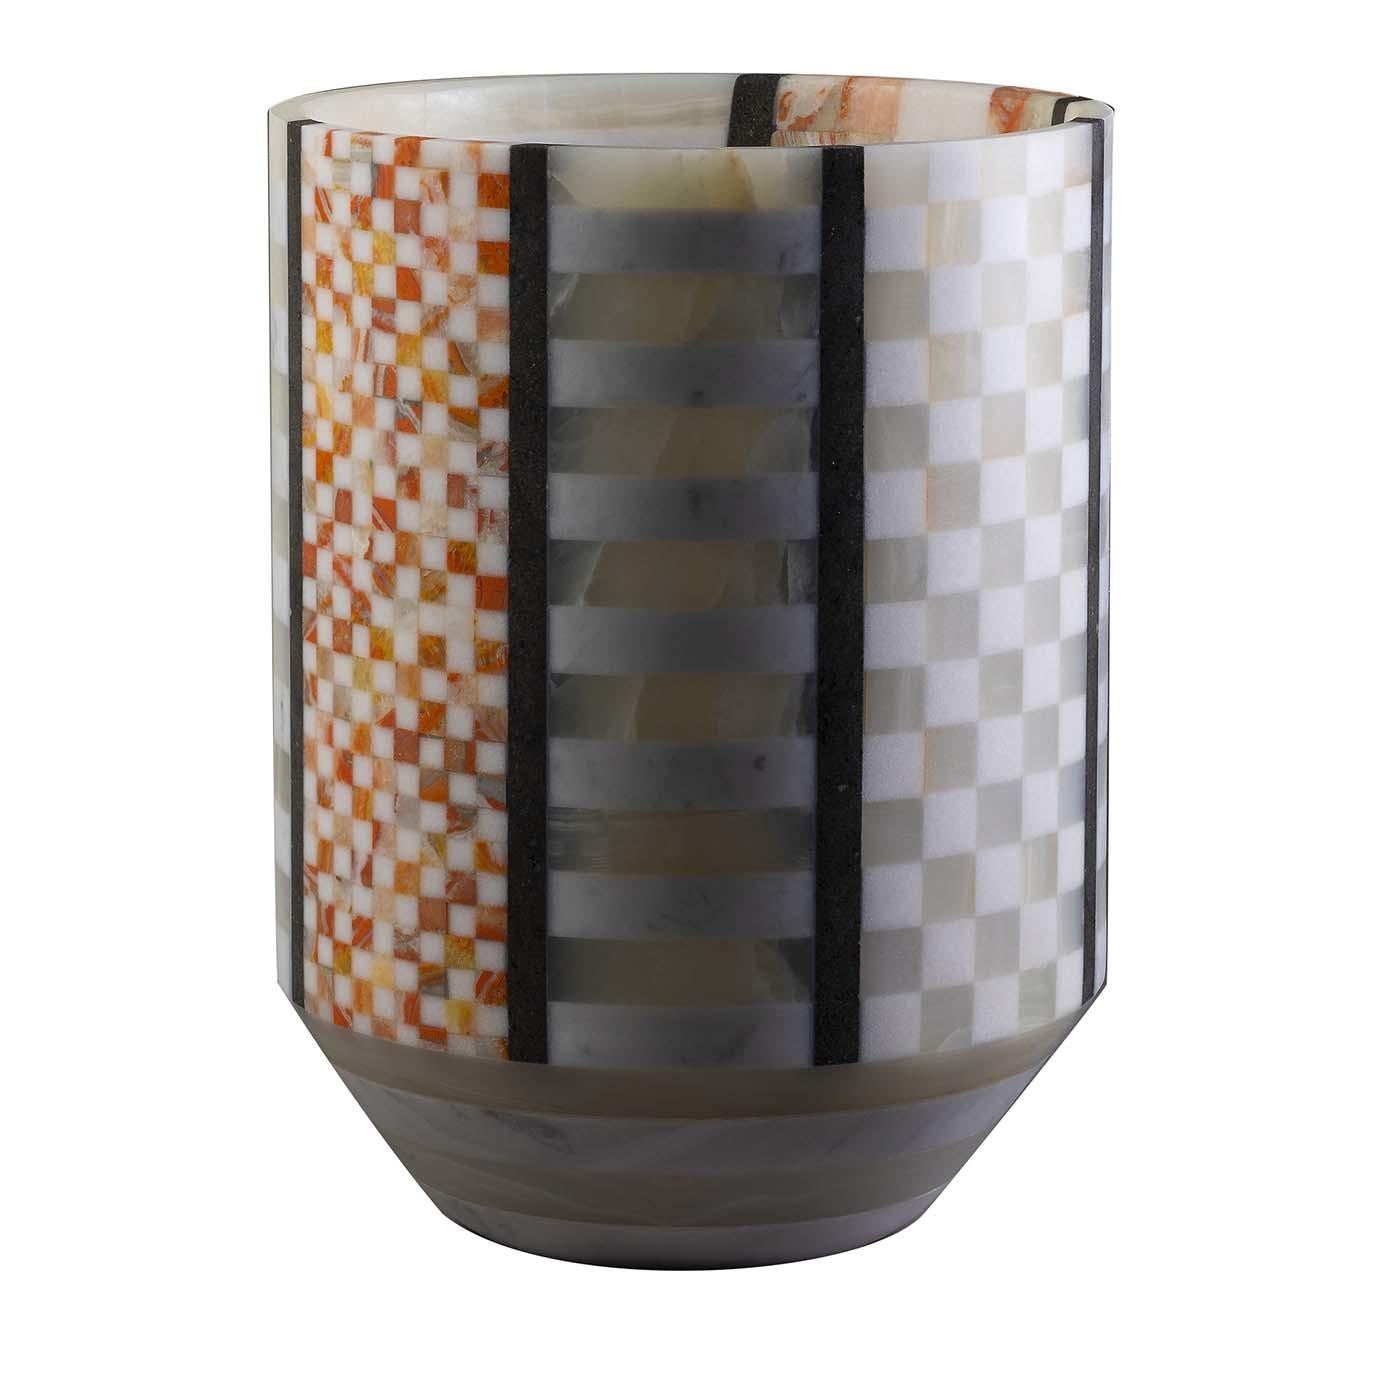 The Hacker collection by Paolo De Vivo debuted at Milan Design Week in 2019 with a series of marble decorative objects defined by mixed geometric patterns. This tall cylindrical vase has a tapered base and boasts three alternating sections of